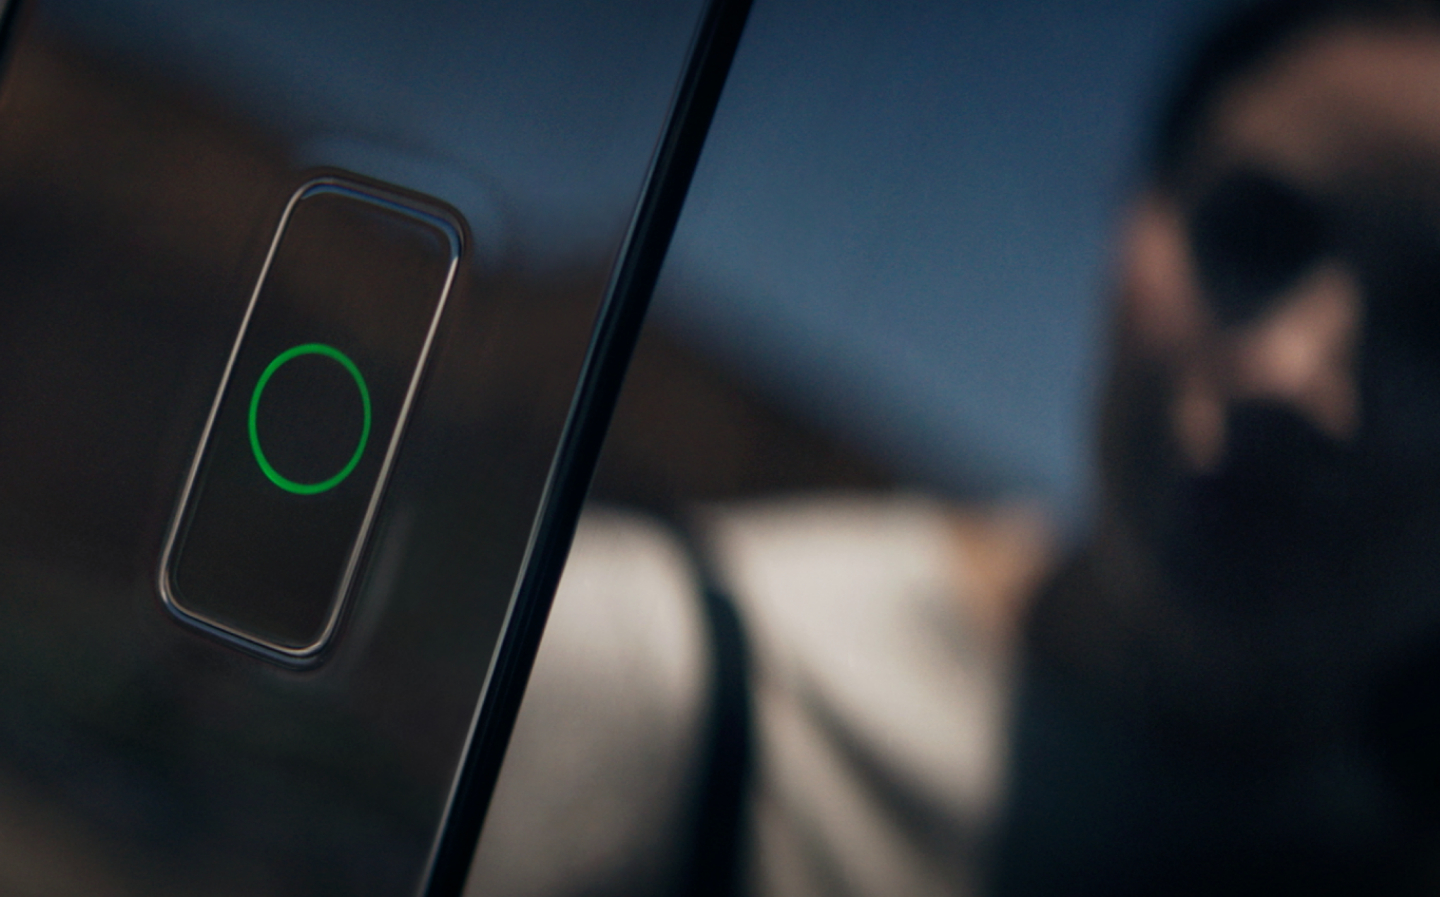 Genesis opens door to keyless car entry via face recognition